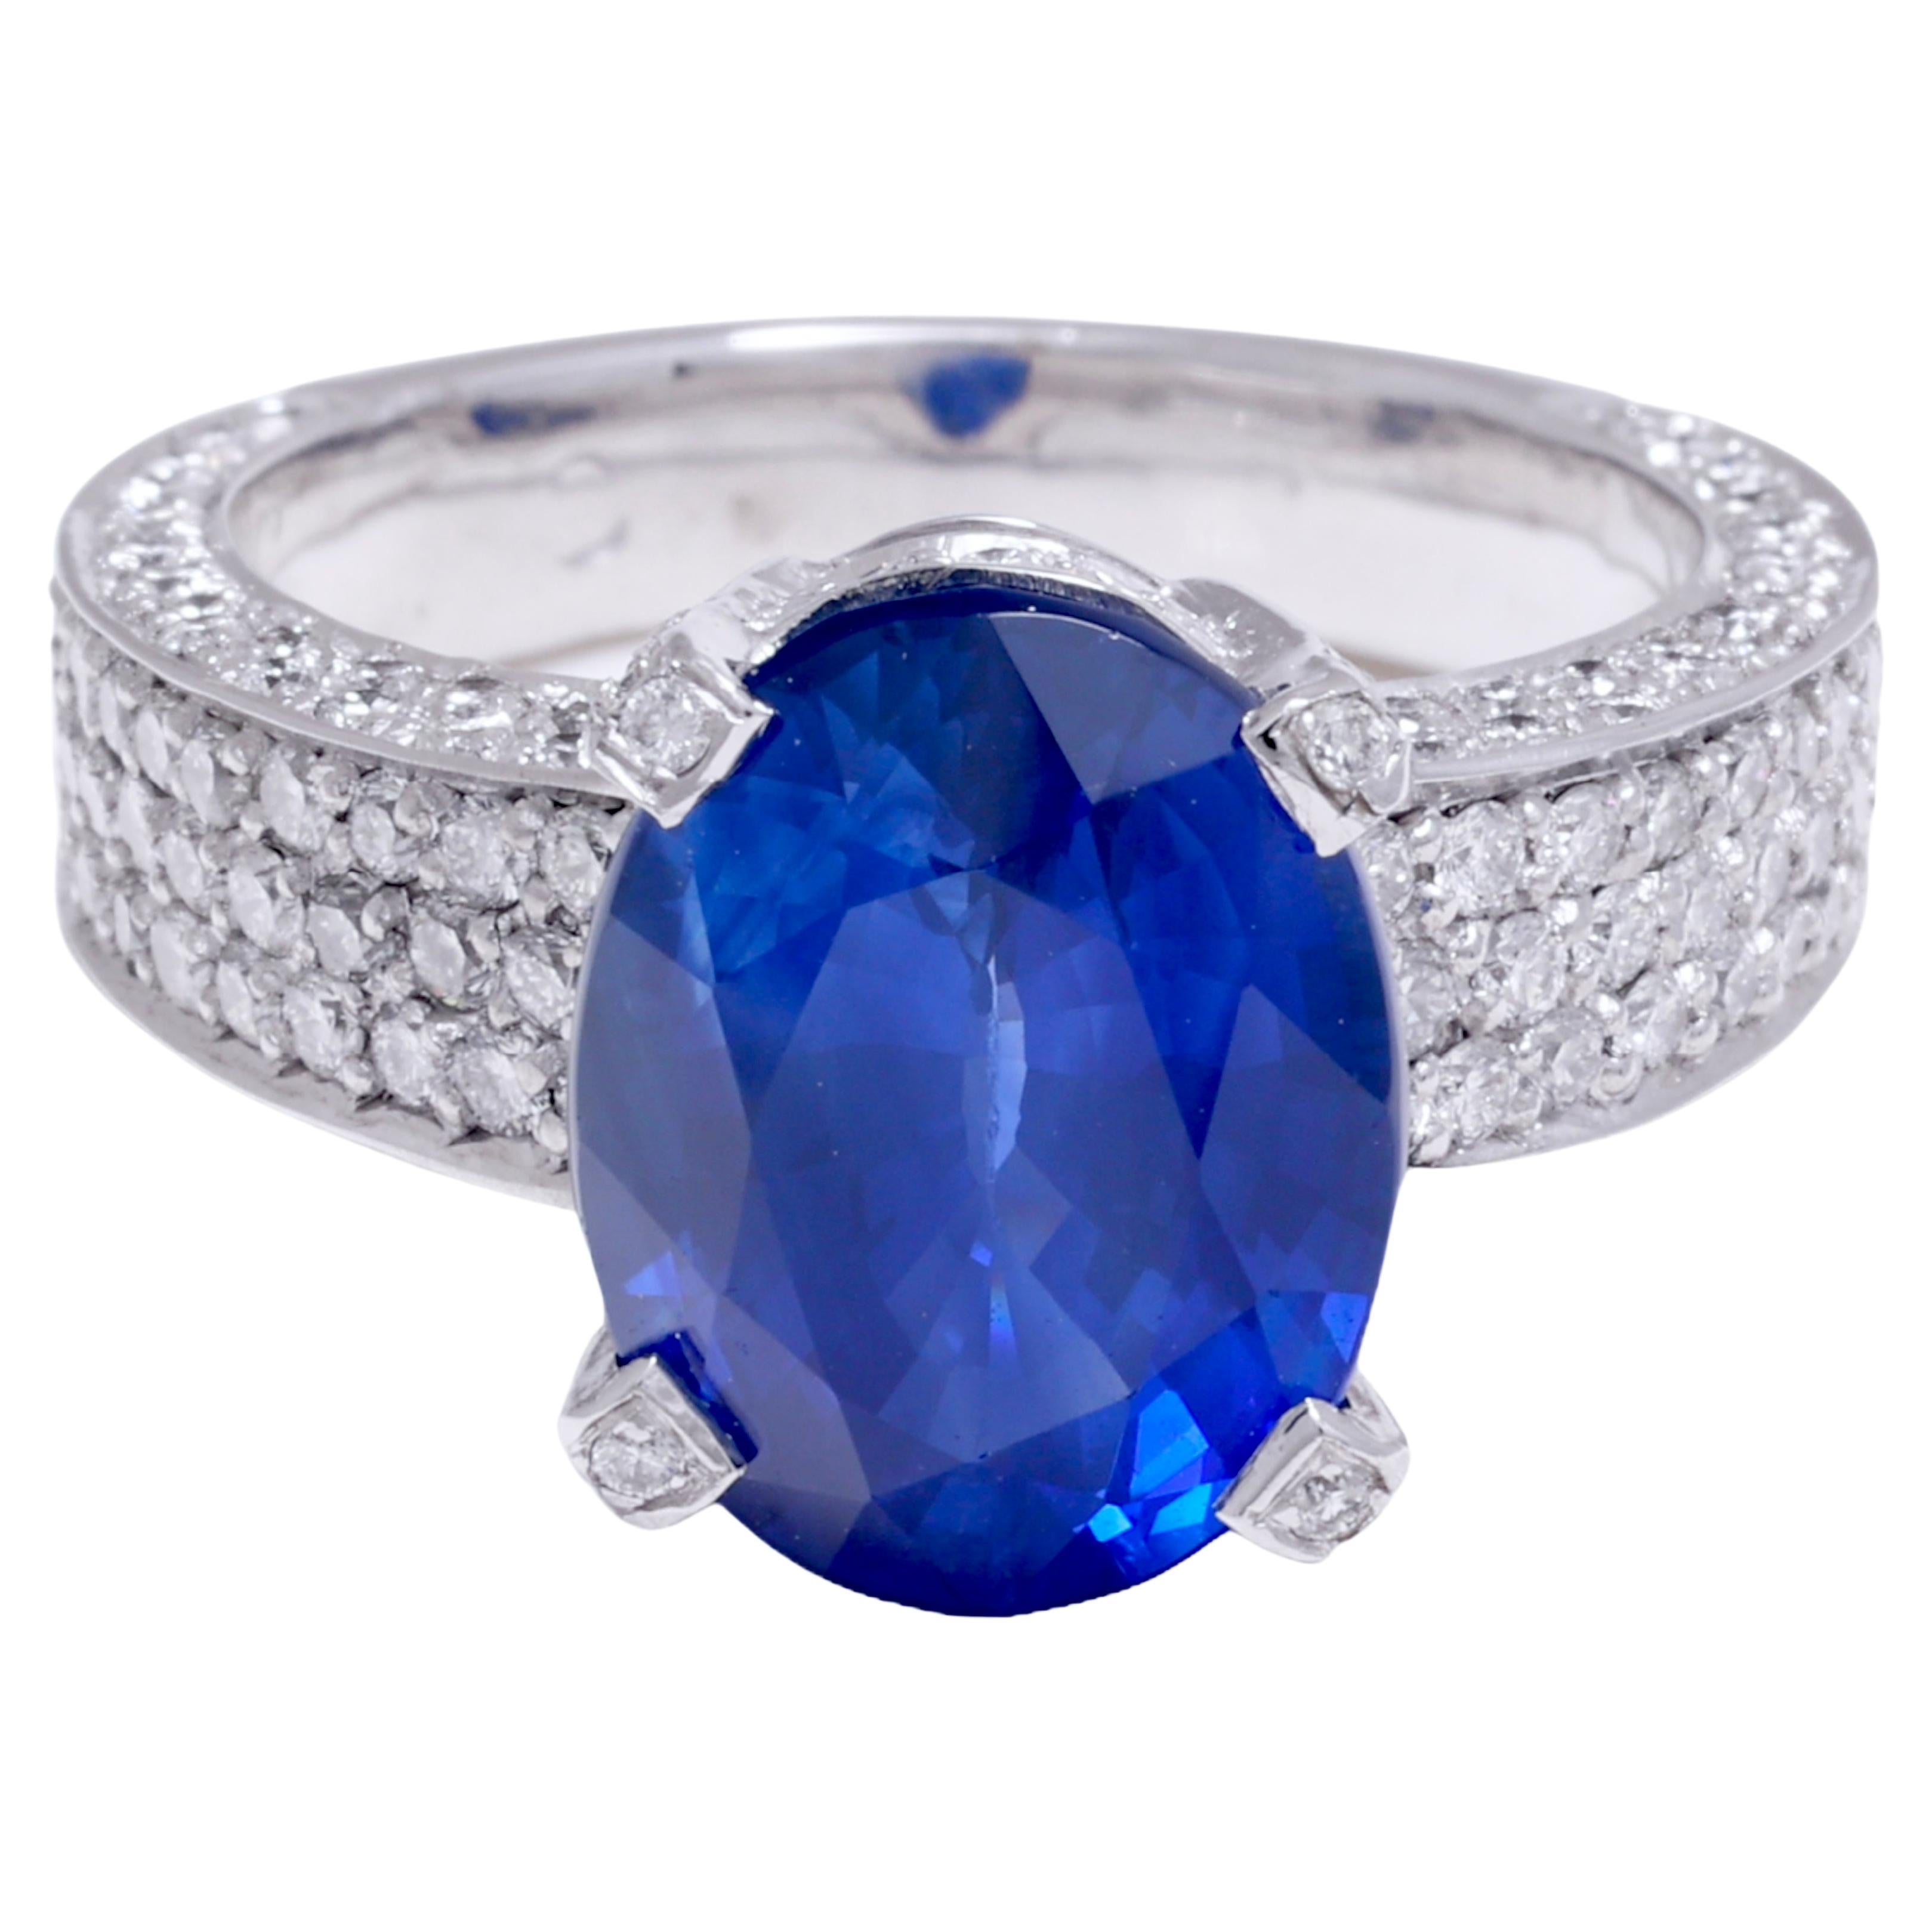  AGL Certified 18kt. White Gold Ring 6.32 ct. Ceylon Sapphire &1.62 ct. Diamonds For Sale